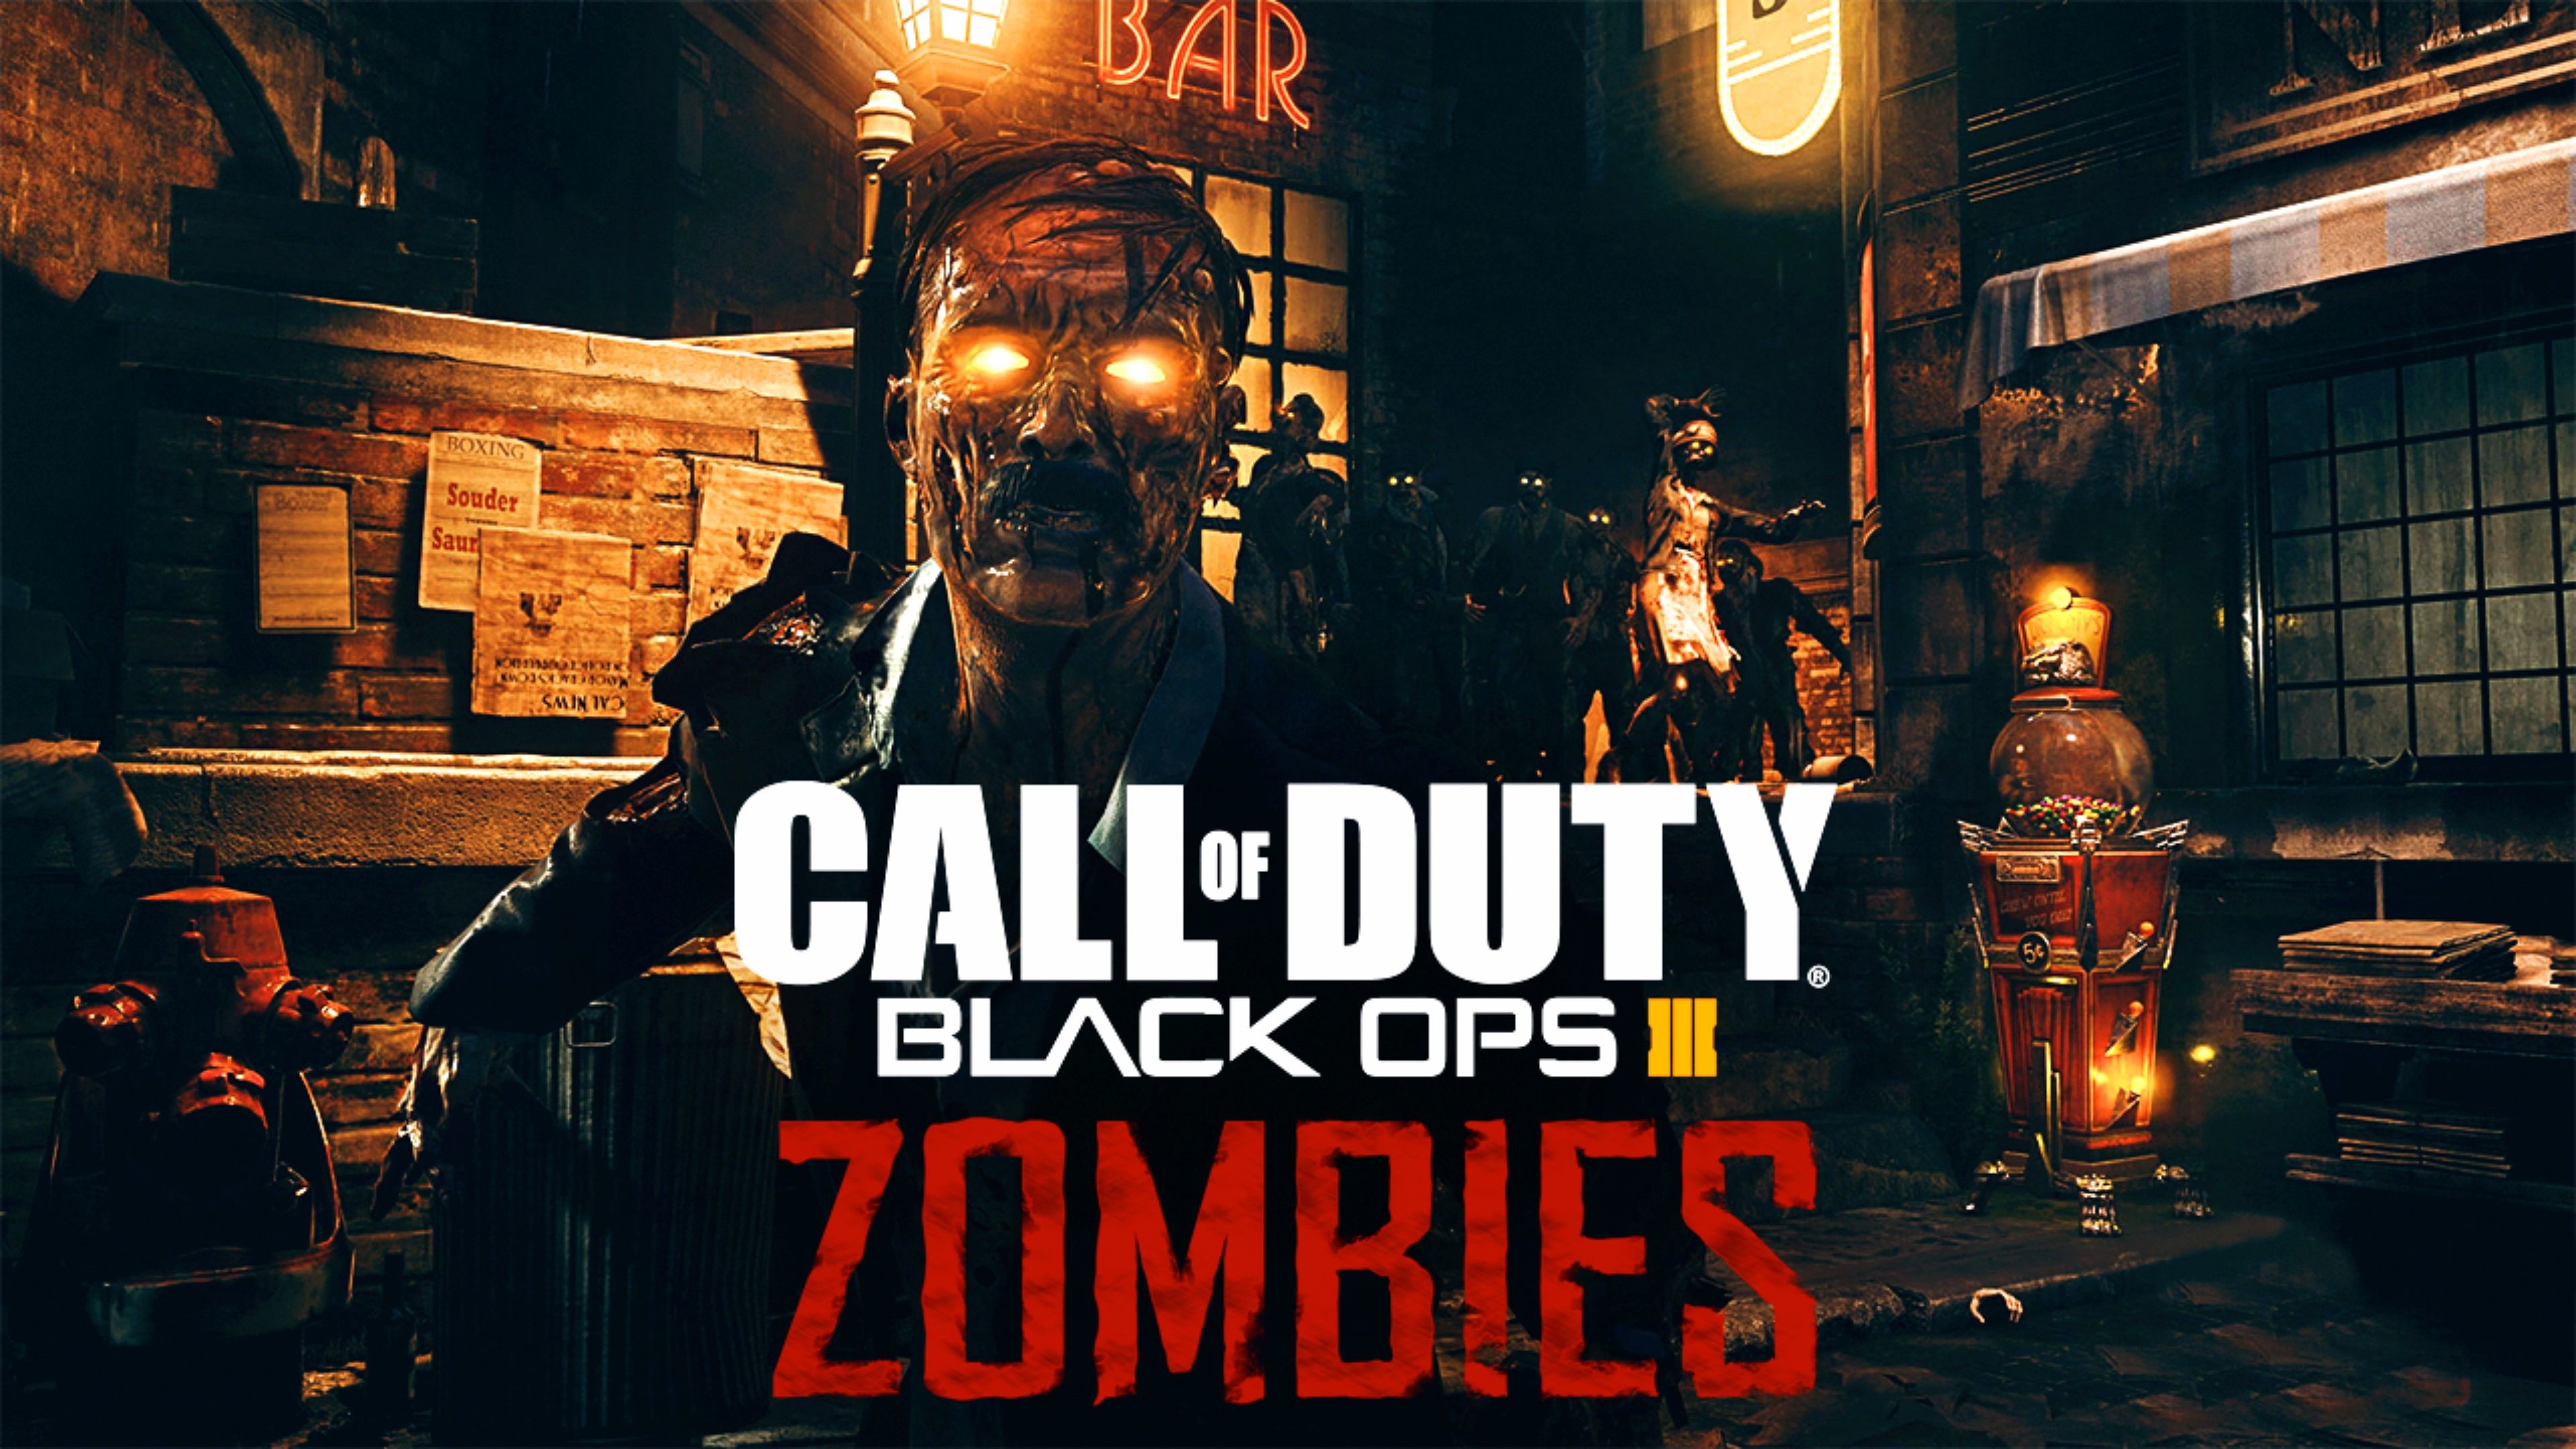 3840x2160 Top Zombies 2016 Call of Duty Black Ops 3 4K Wallpaper